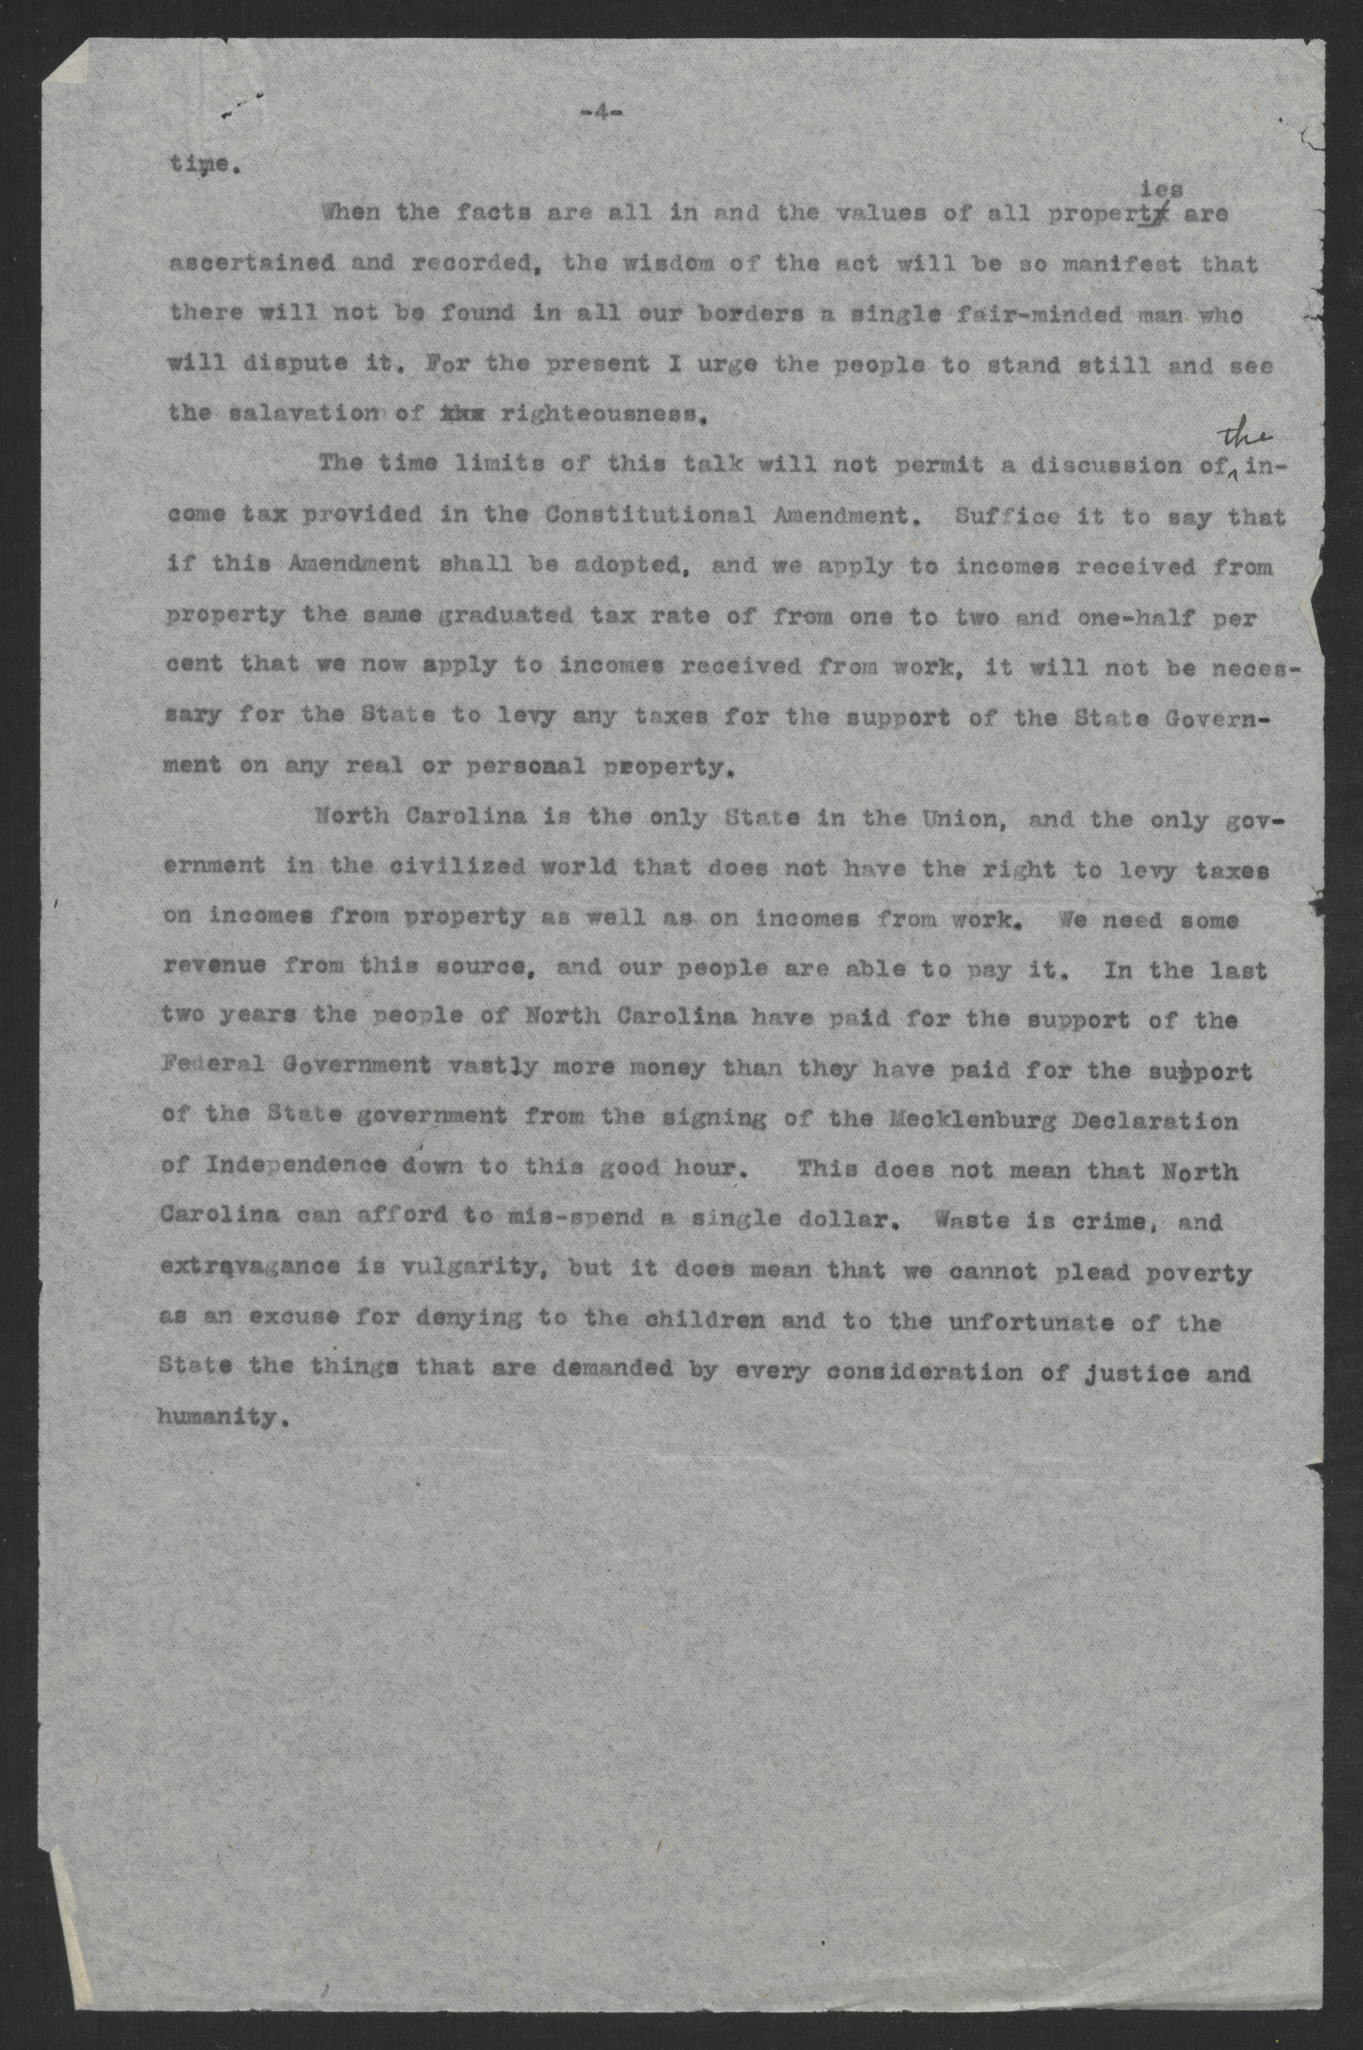 Address Before the Teachers' Assembly by Governor Thomas W. Bickett, November 28, 1919, page 4